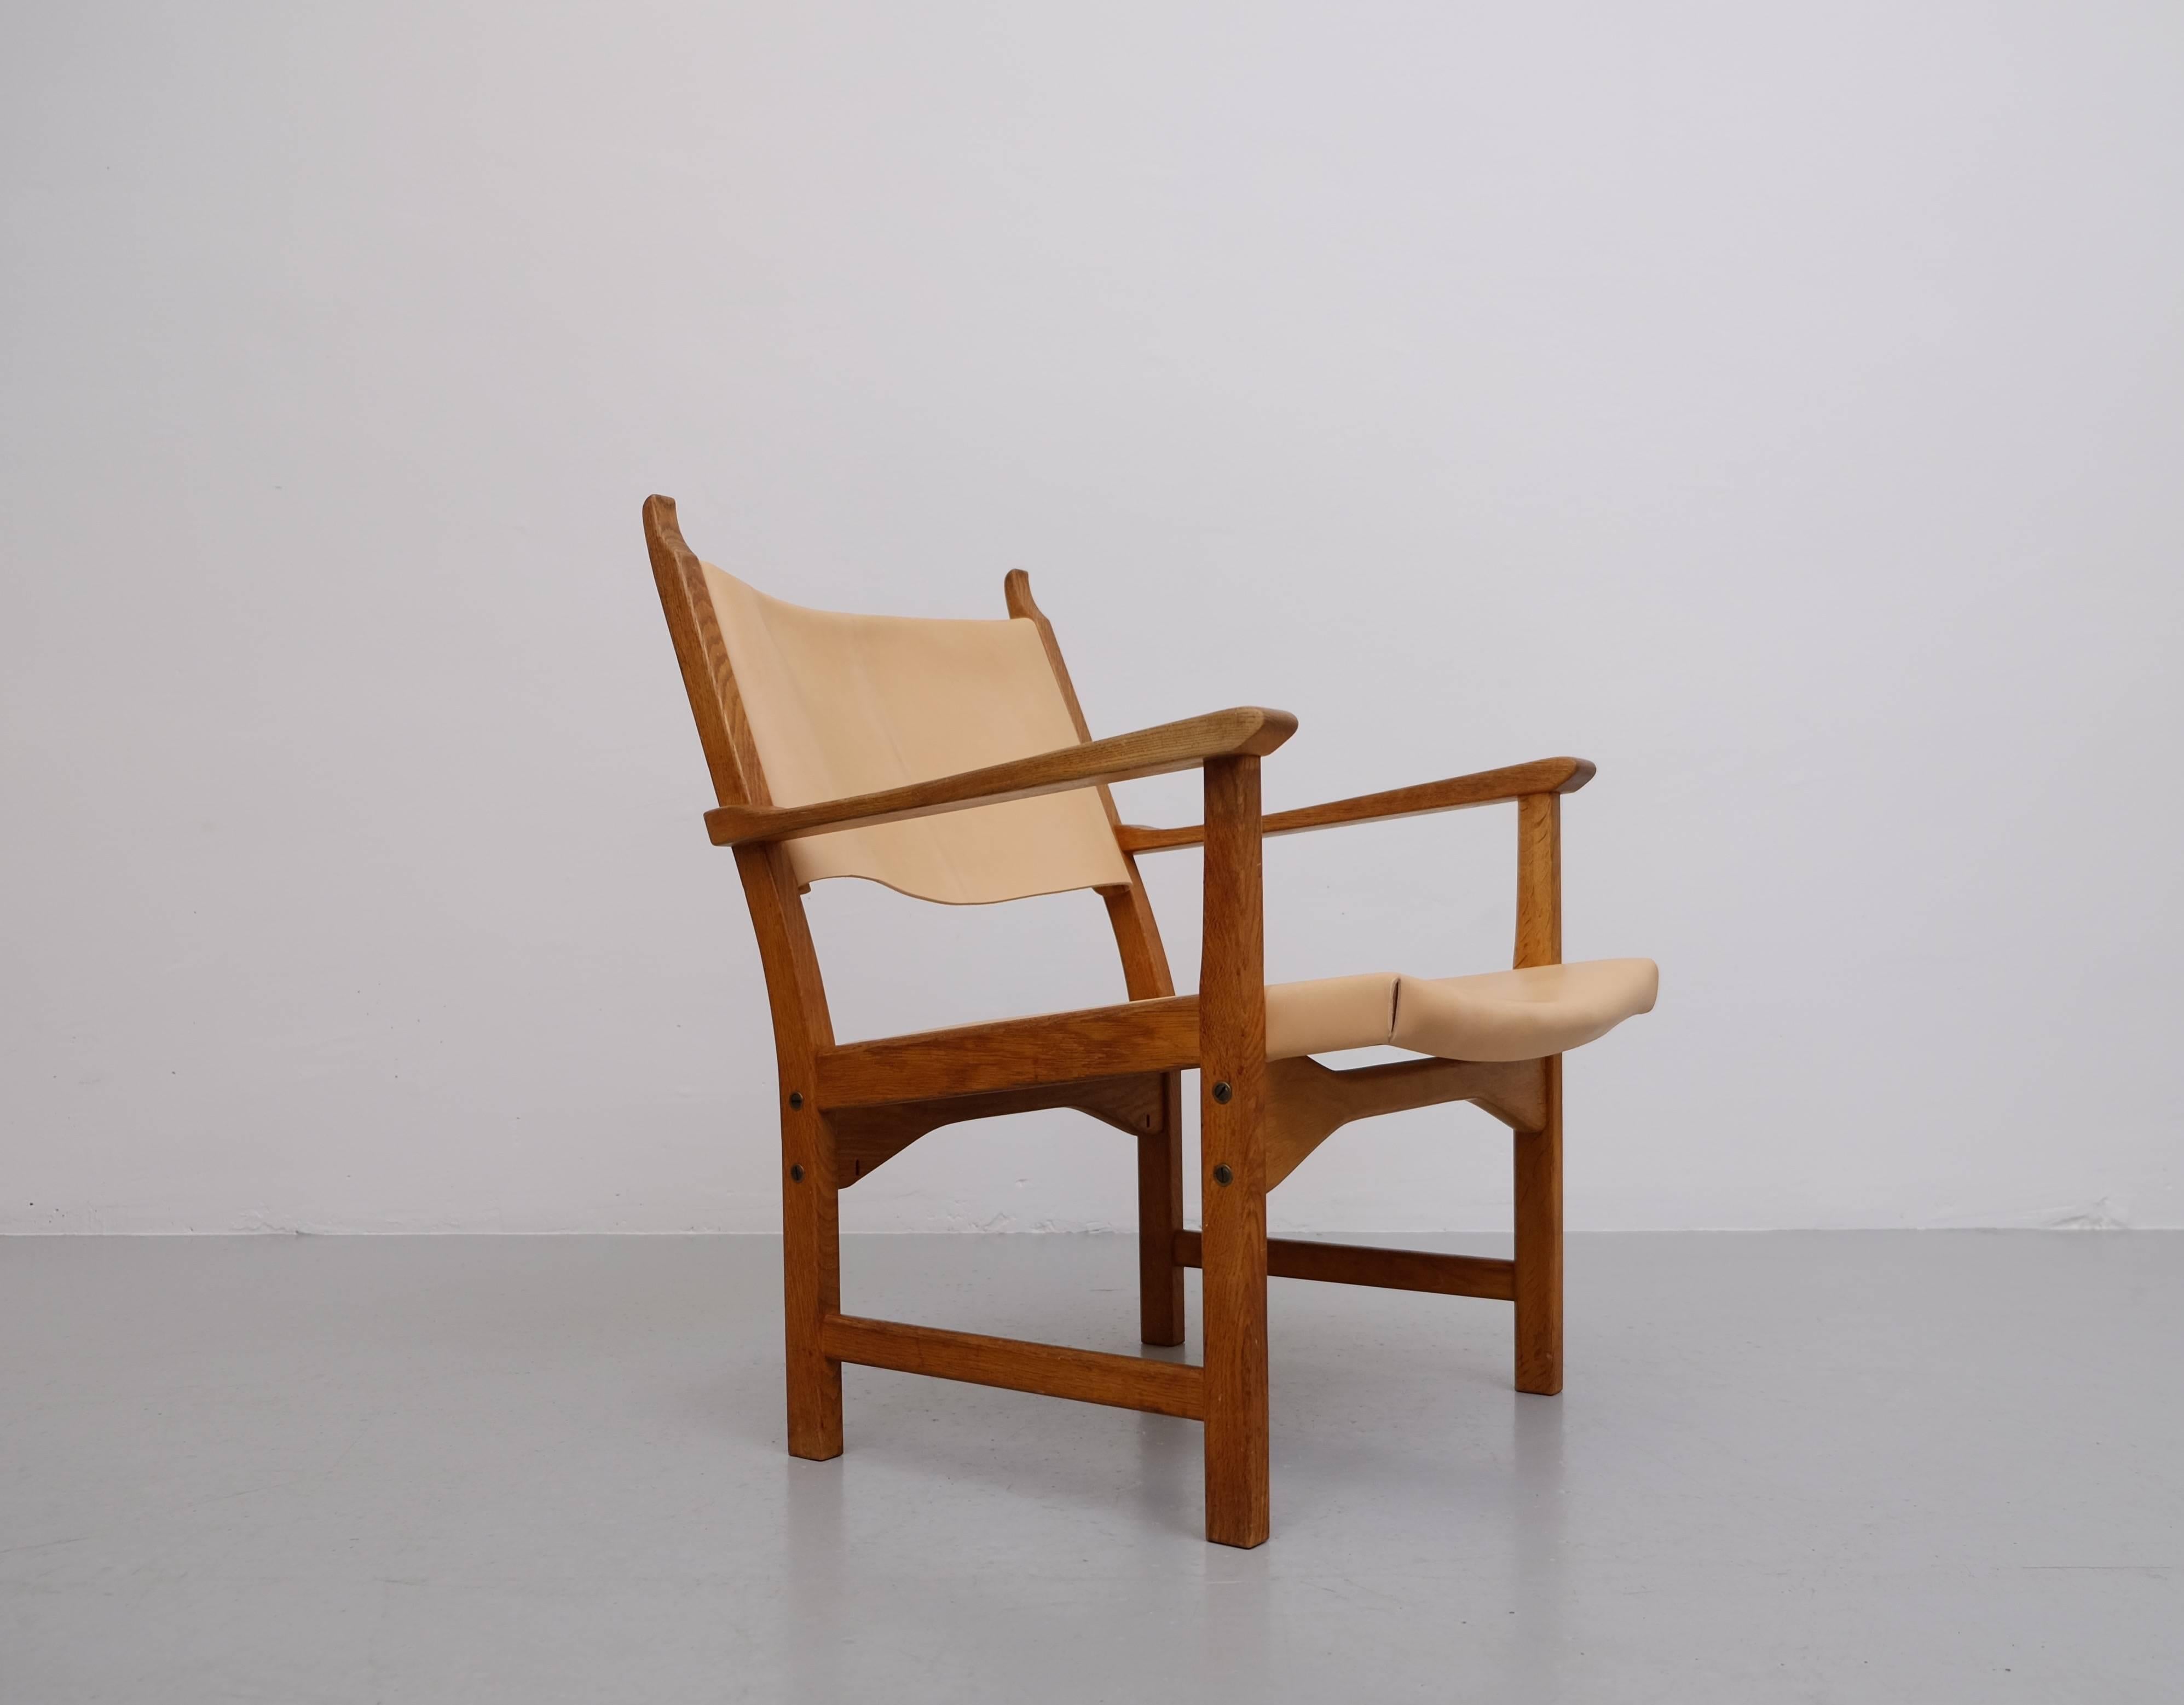 A result of a design collaboration between Carl Malmsten and Yngve Ekström.
Produced by Swedese, 1950s. Reupholstered in natural leather. Oak frame.